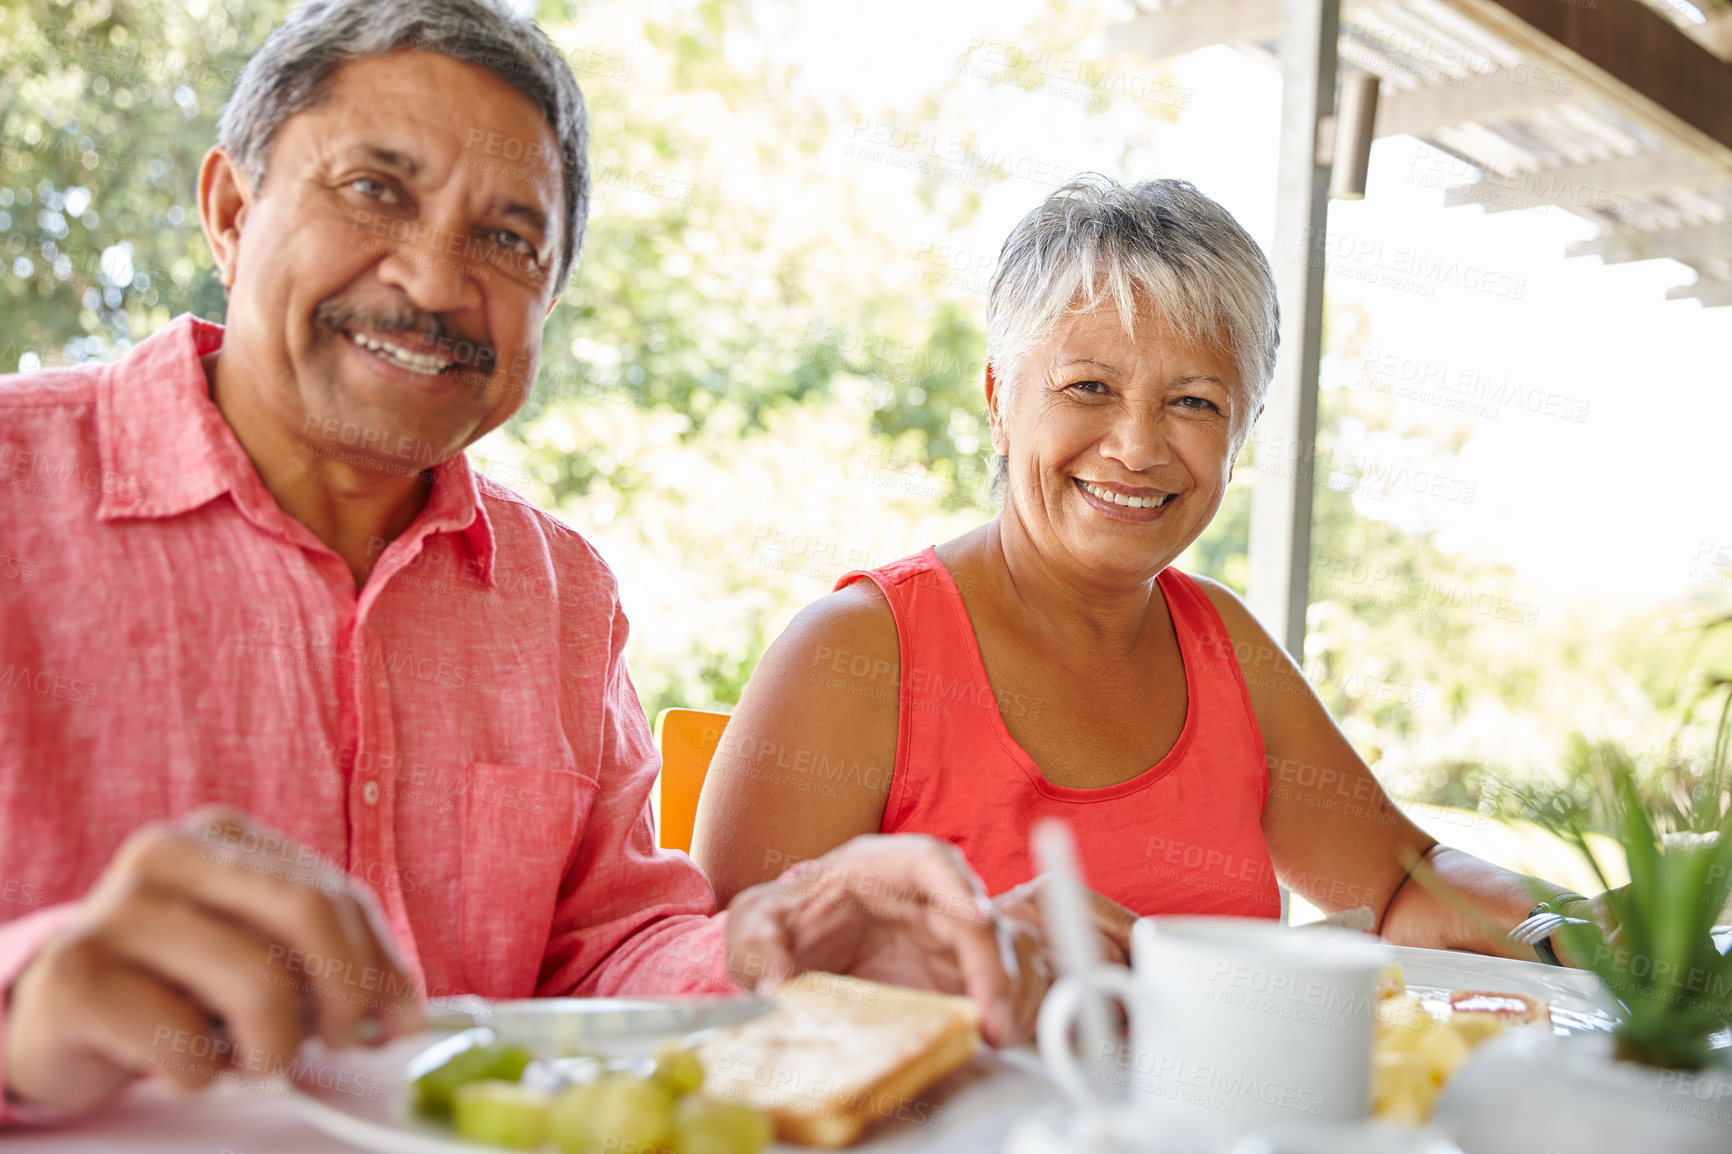 Buy stock photo Shot of a happy senior couple enjoying a leisurely breakfast together at home